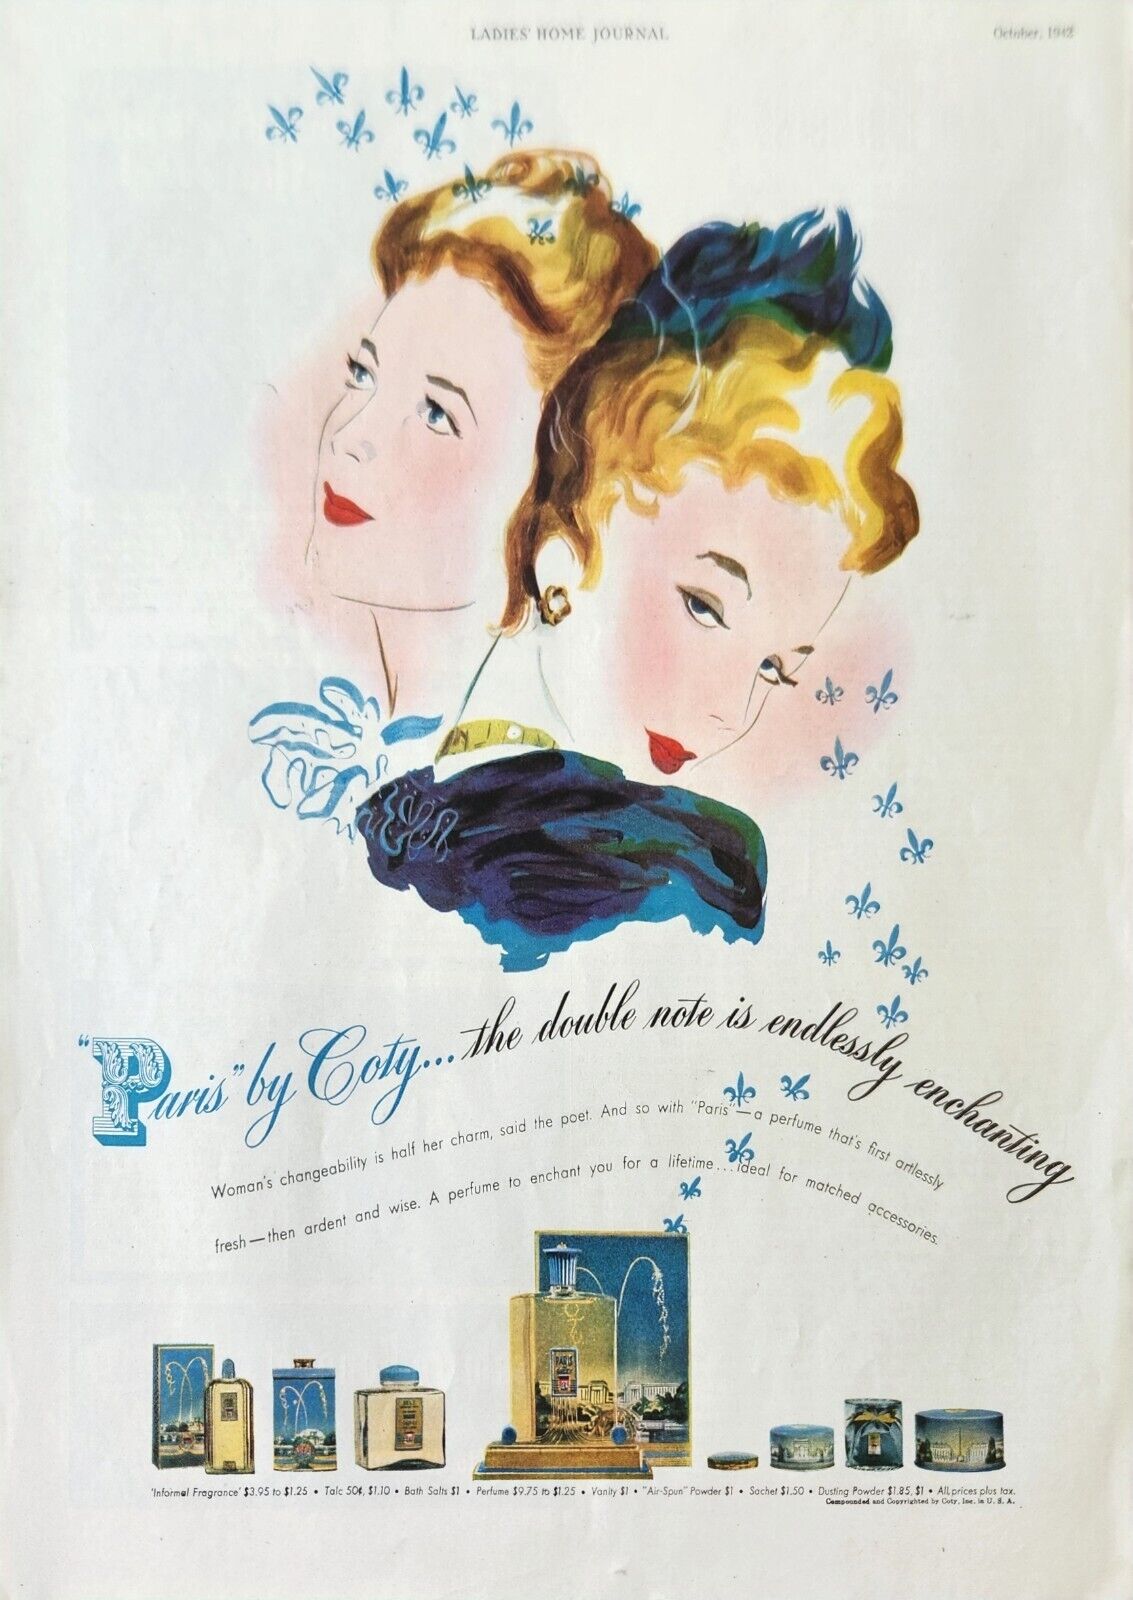 1942 Paris by Coty Perfune Vintage Ad Endlessly enchanting